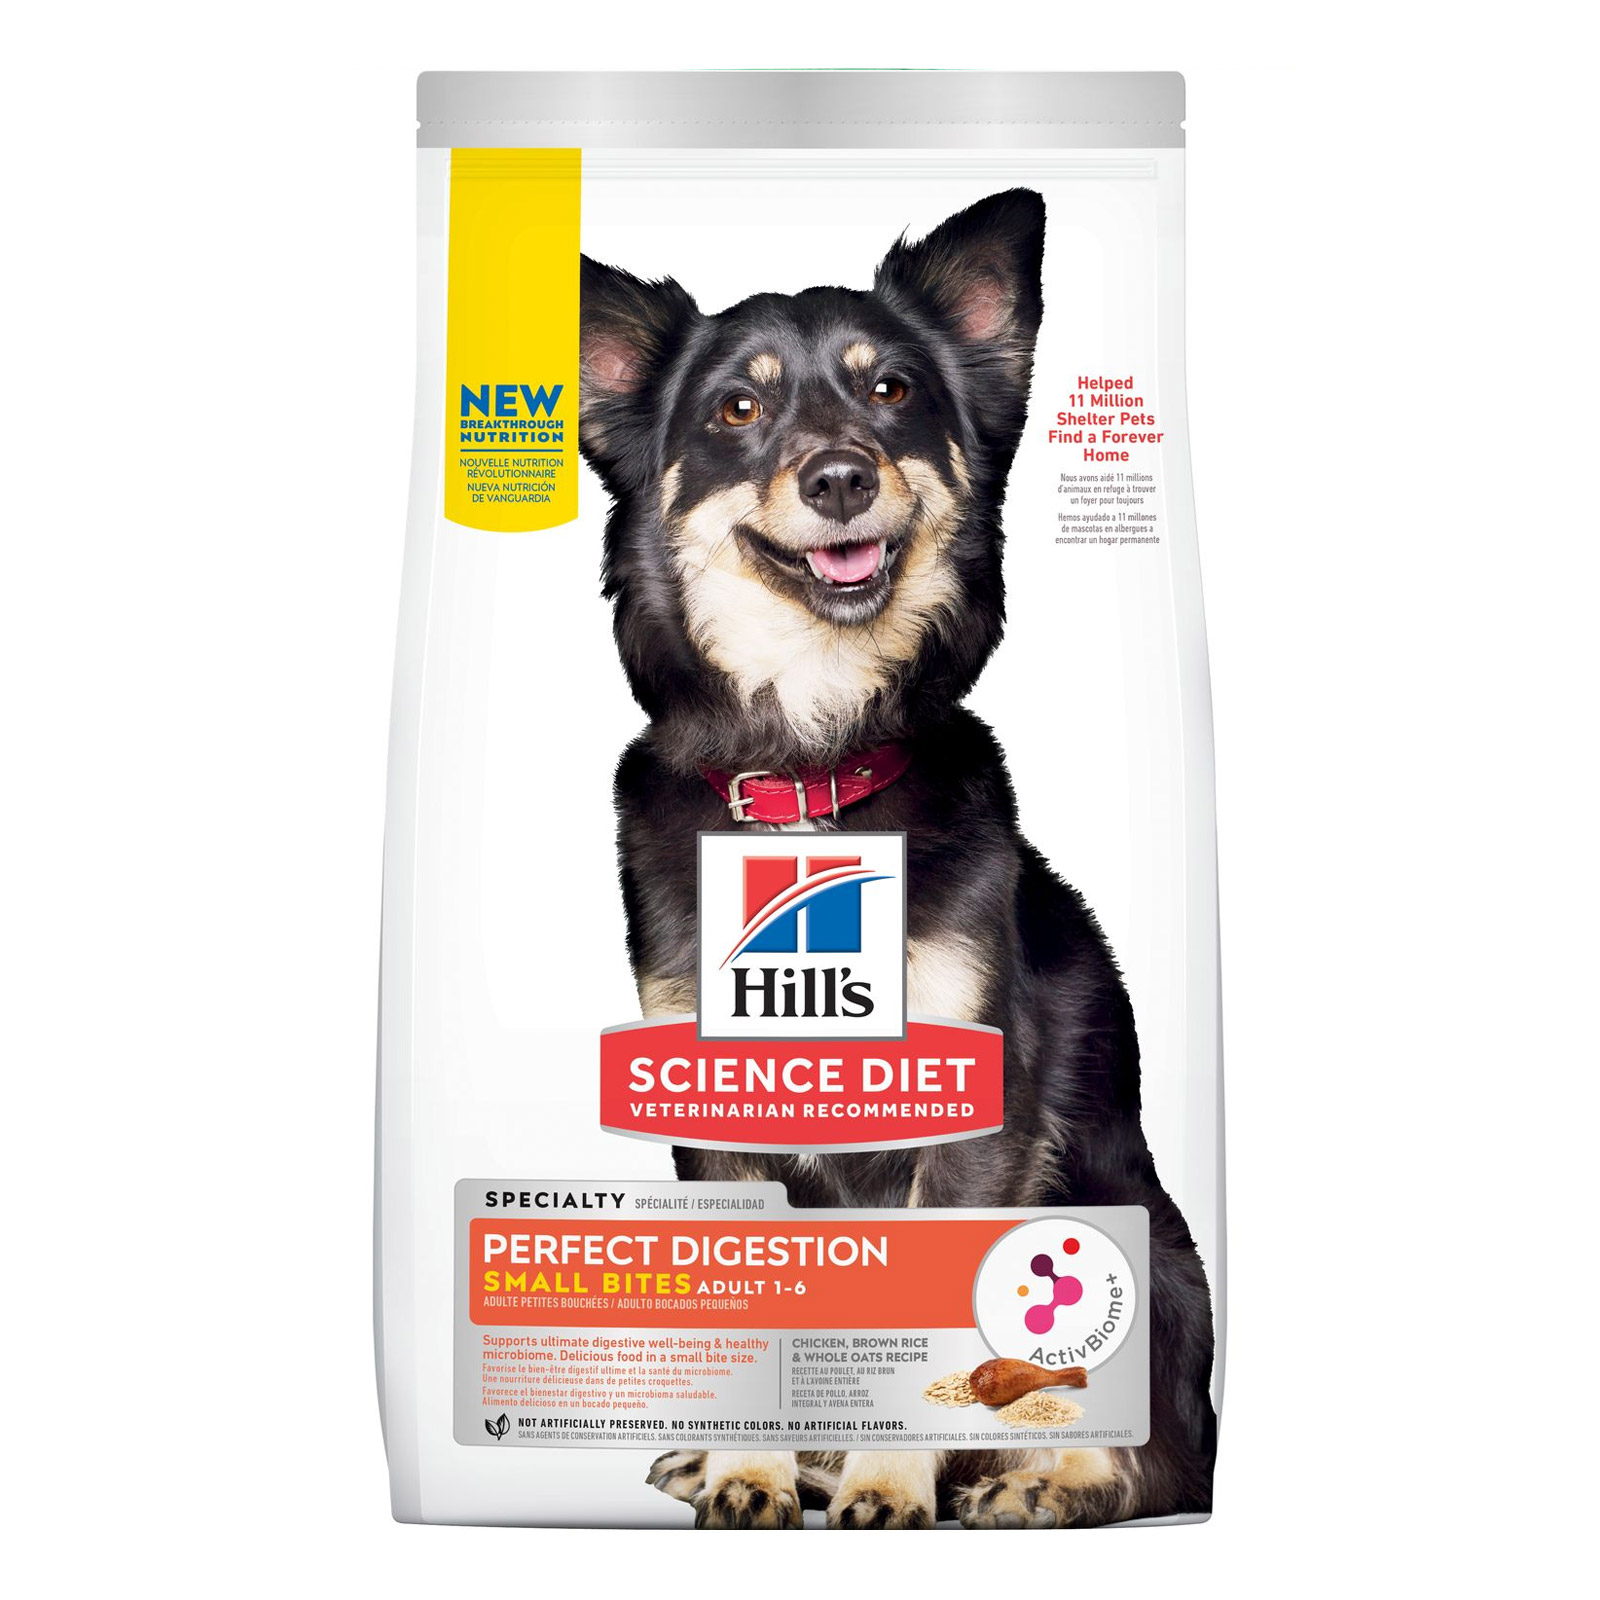 Hill's Science Diet Perfect Digestion Small Bites Dog Food